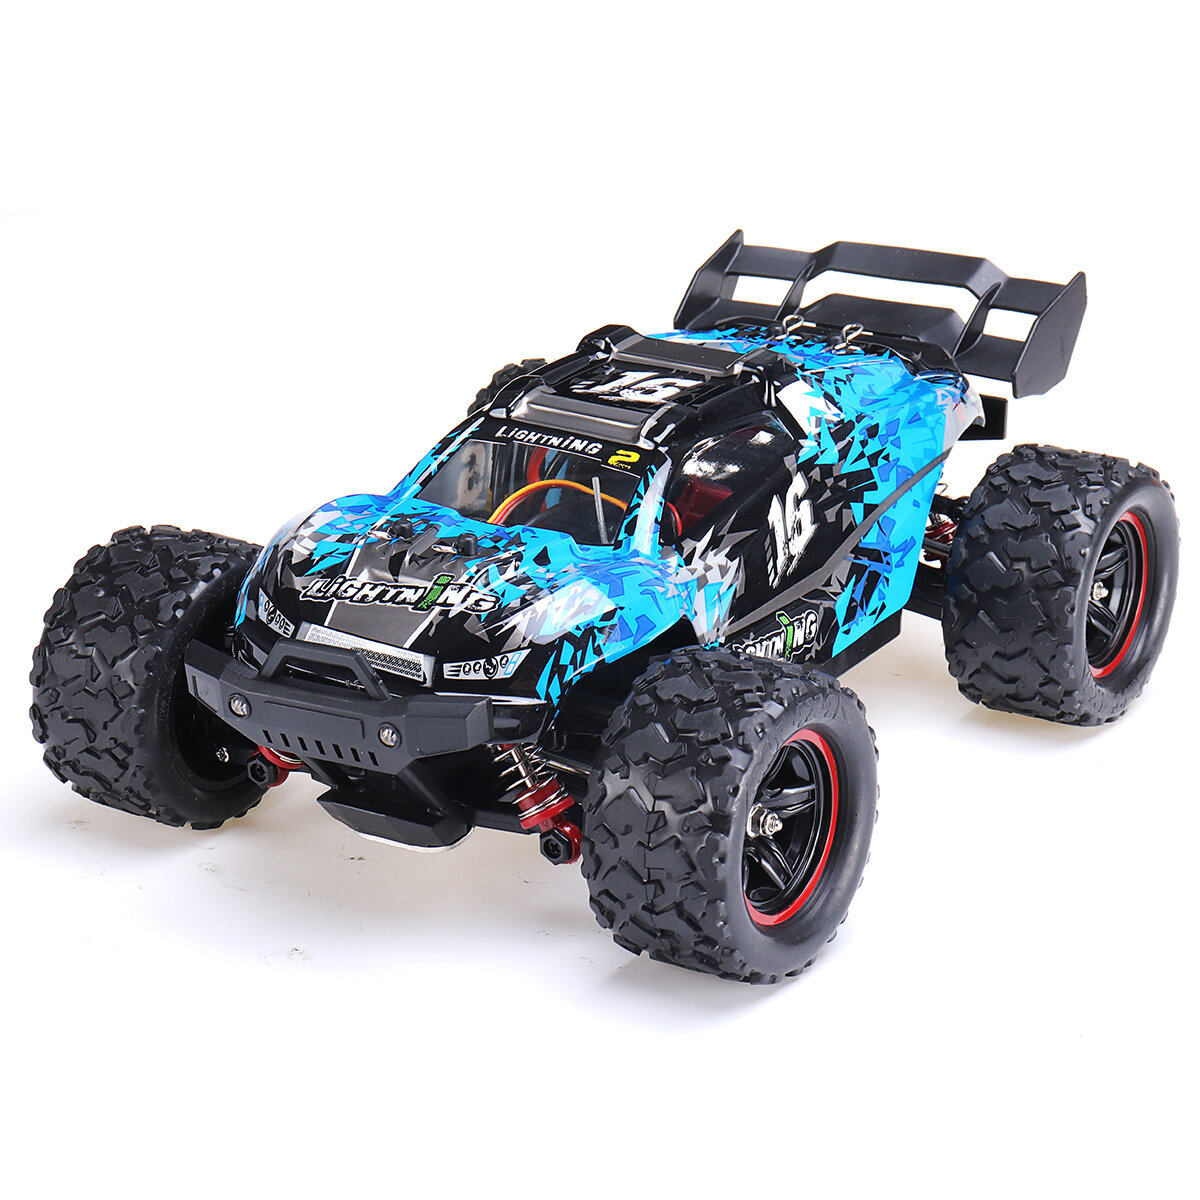 HS 18421 18422 18423 1/18 RC Car 2.4G Alloy Brushless Off Road High Speed 52km/h RC Vehicle Models F